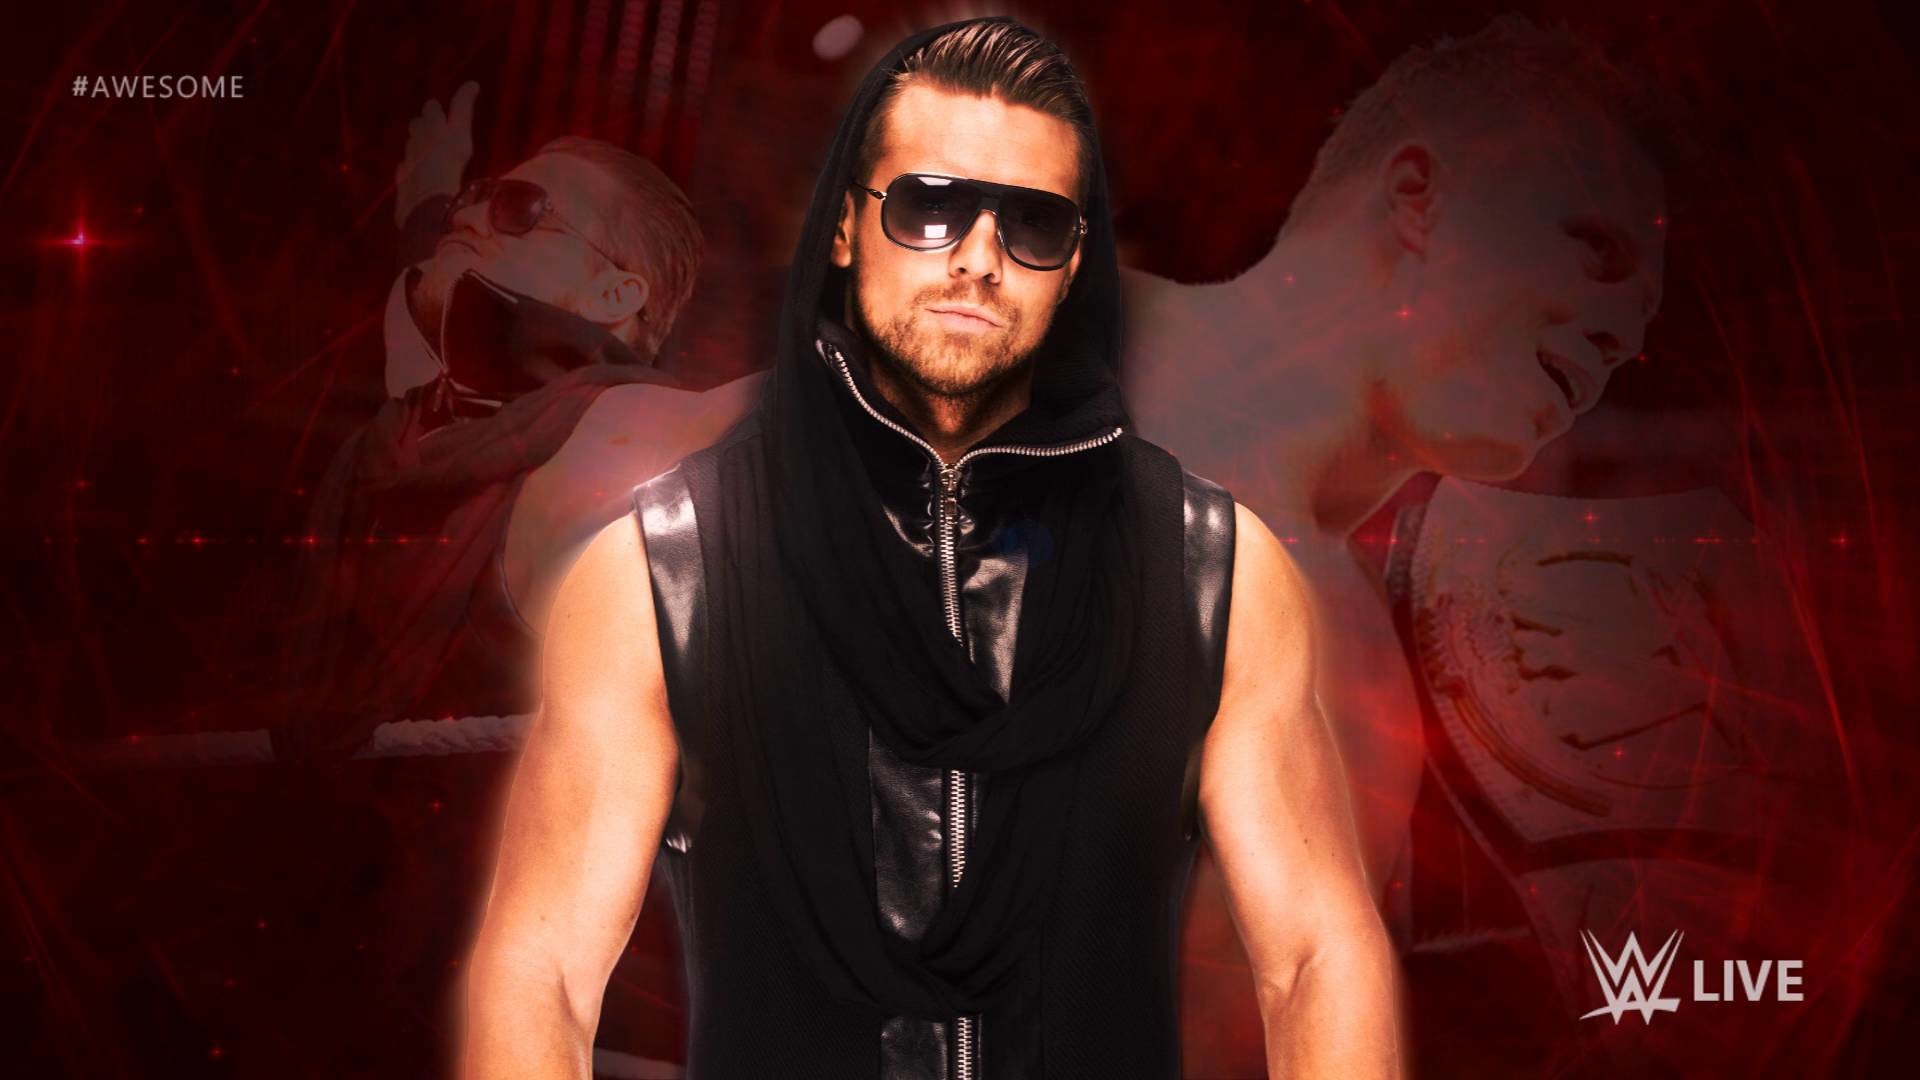 1920x1080 2014-2016: The Miz 10th WWE Theme Song "I Came To Play" by Downstait with  Download Link - YouTube